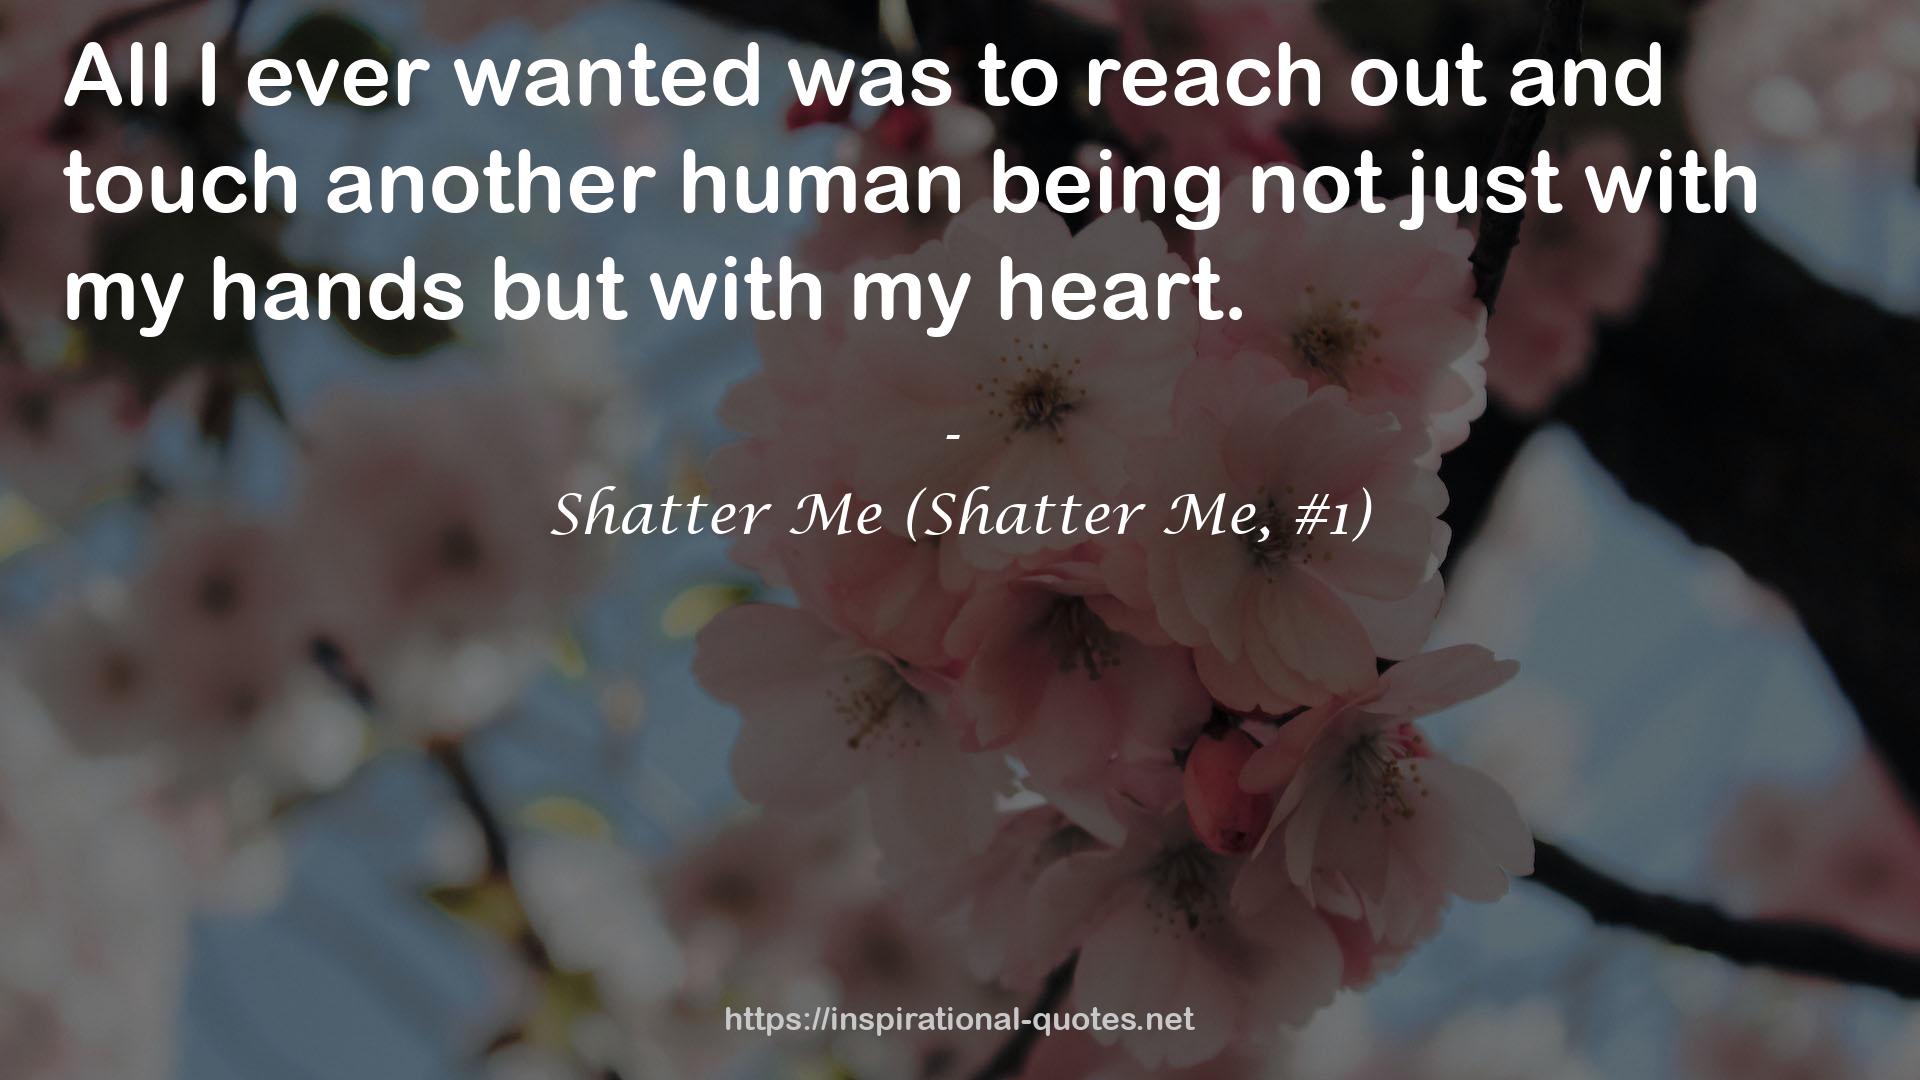 Shatter Me (Shatter Me, #1) QUOTES